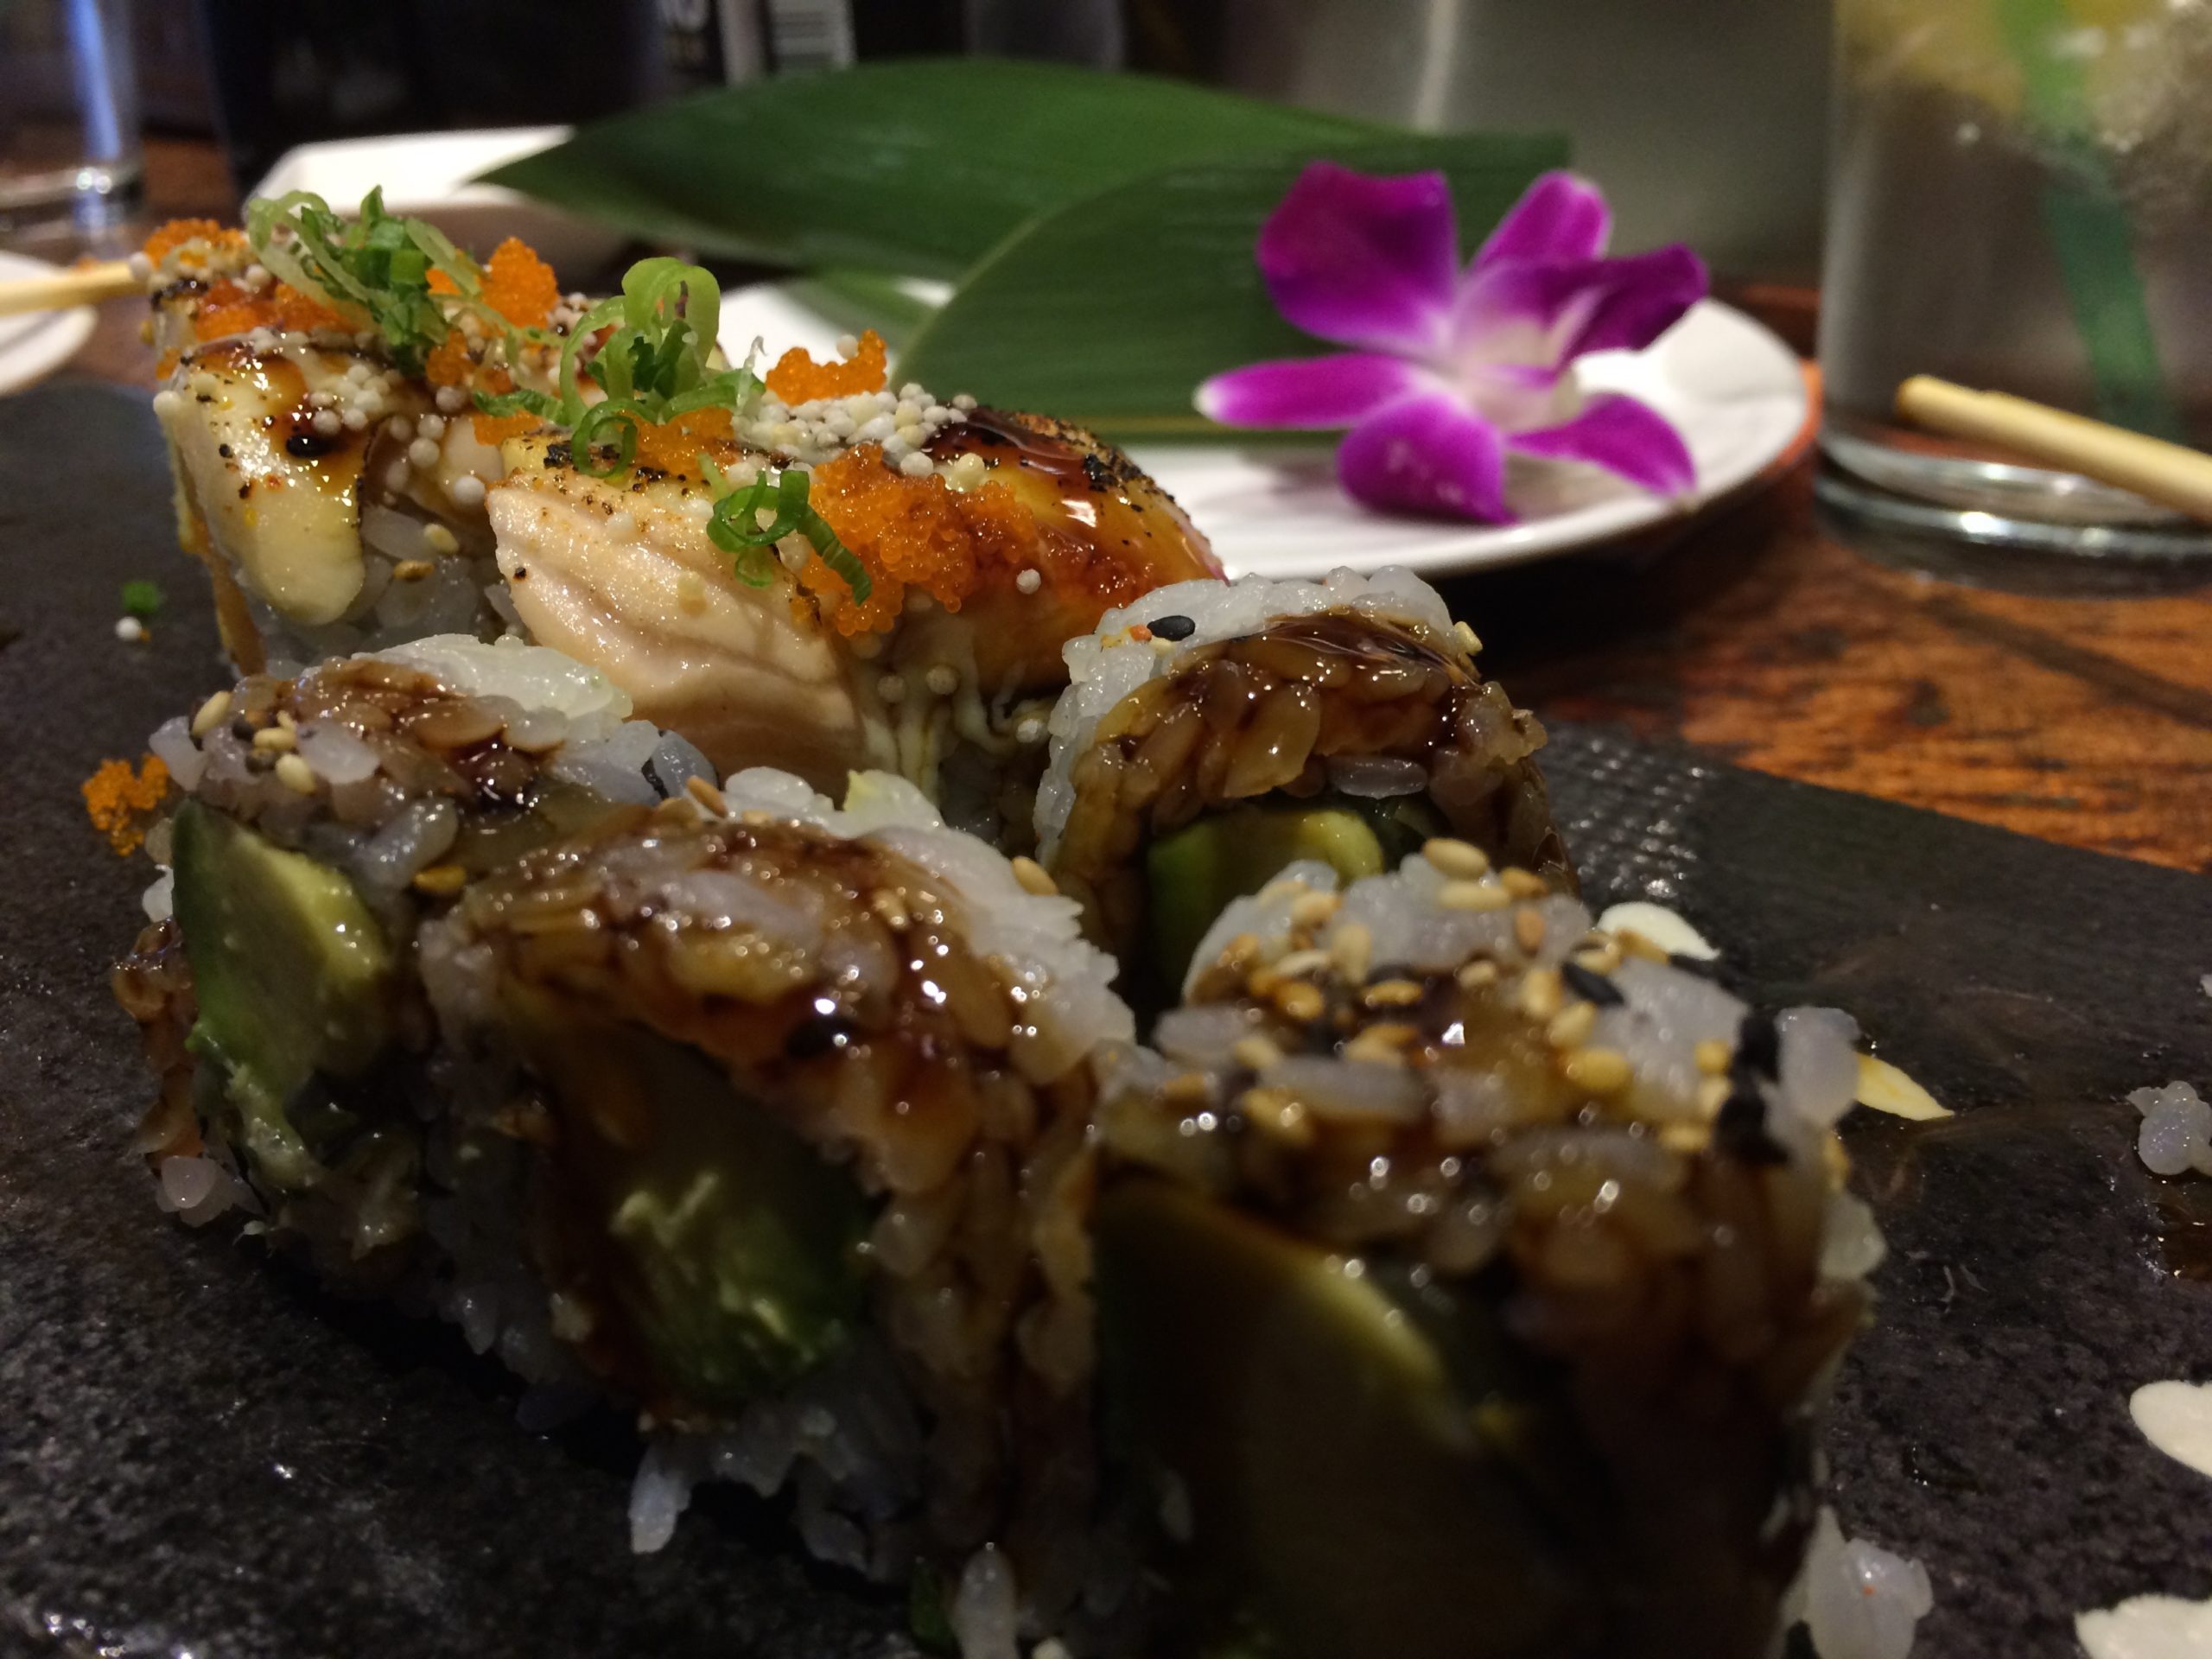 Sushi After a Long Week – So Good!